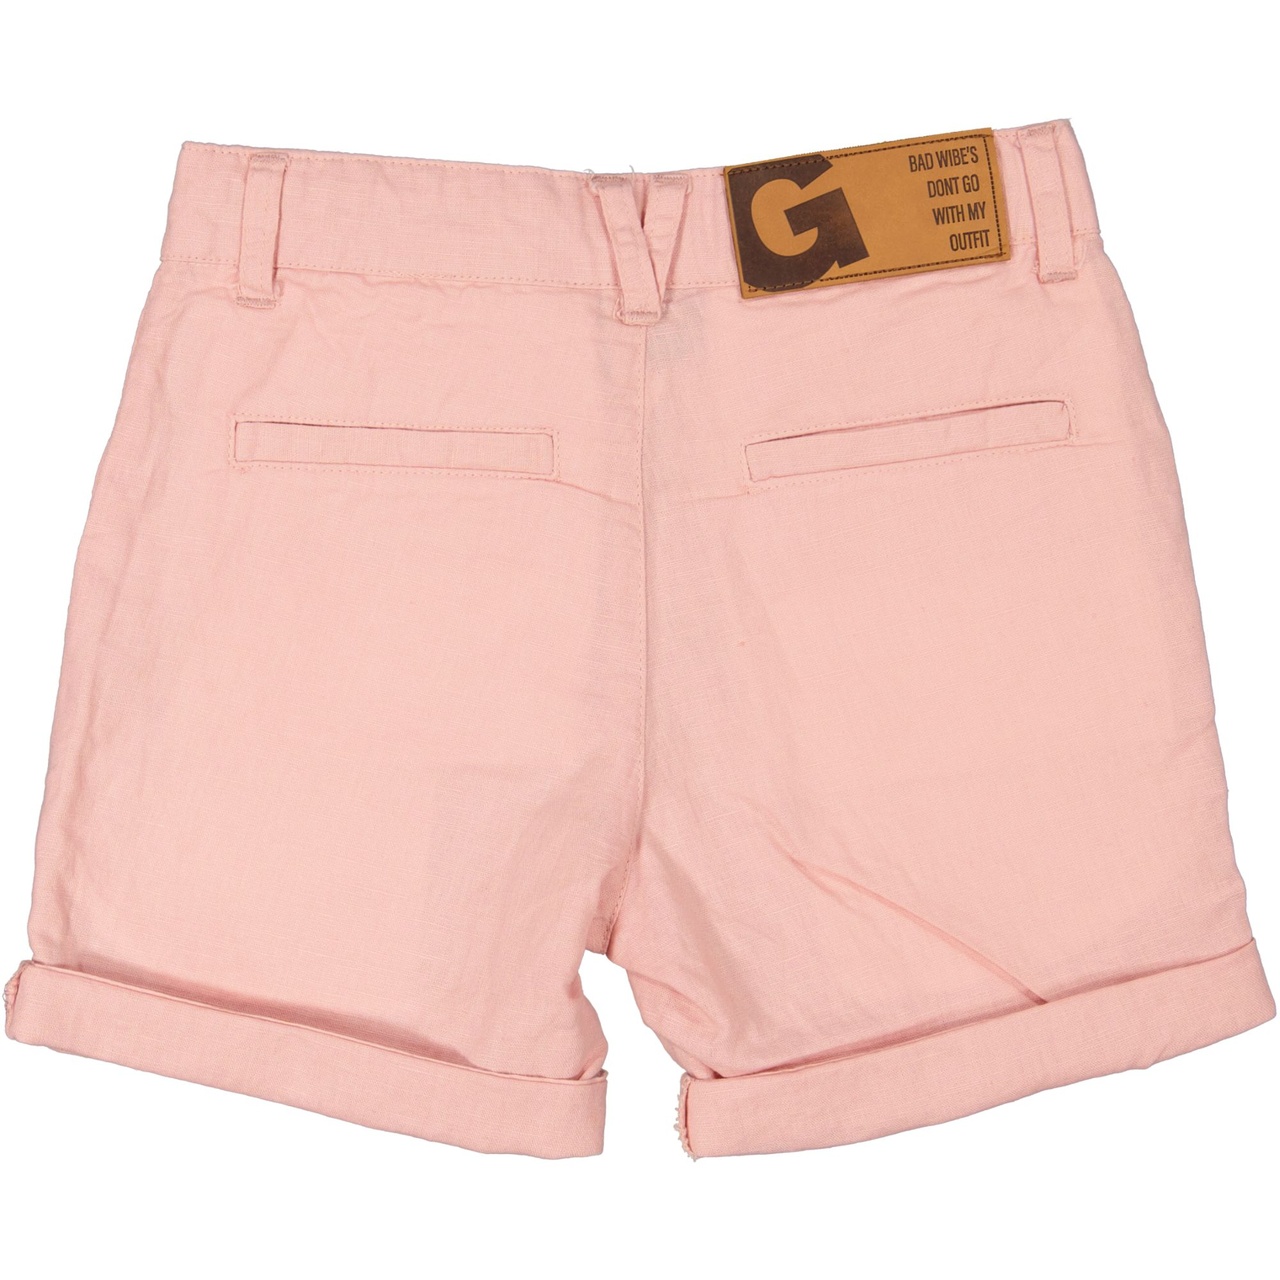 Linnen shorts Old pink 86/92